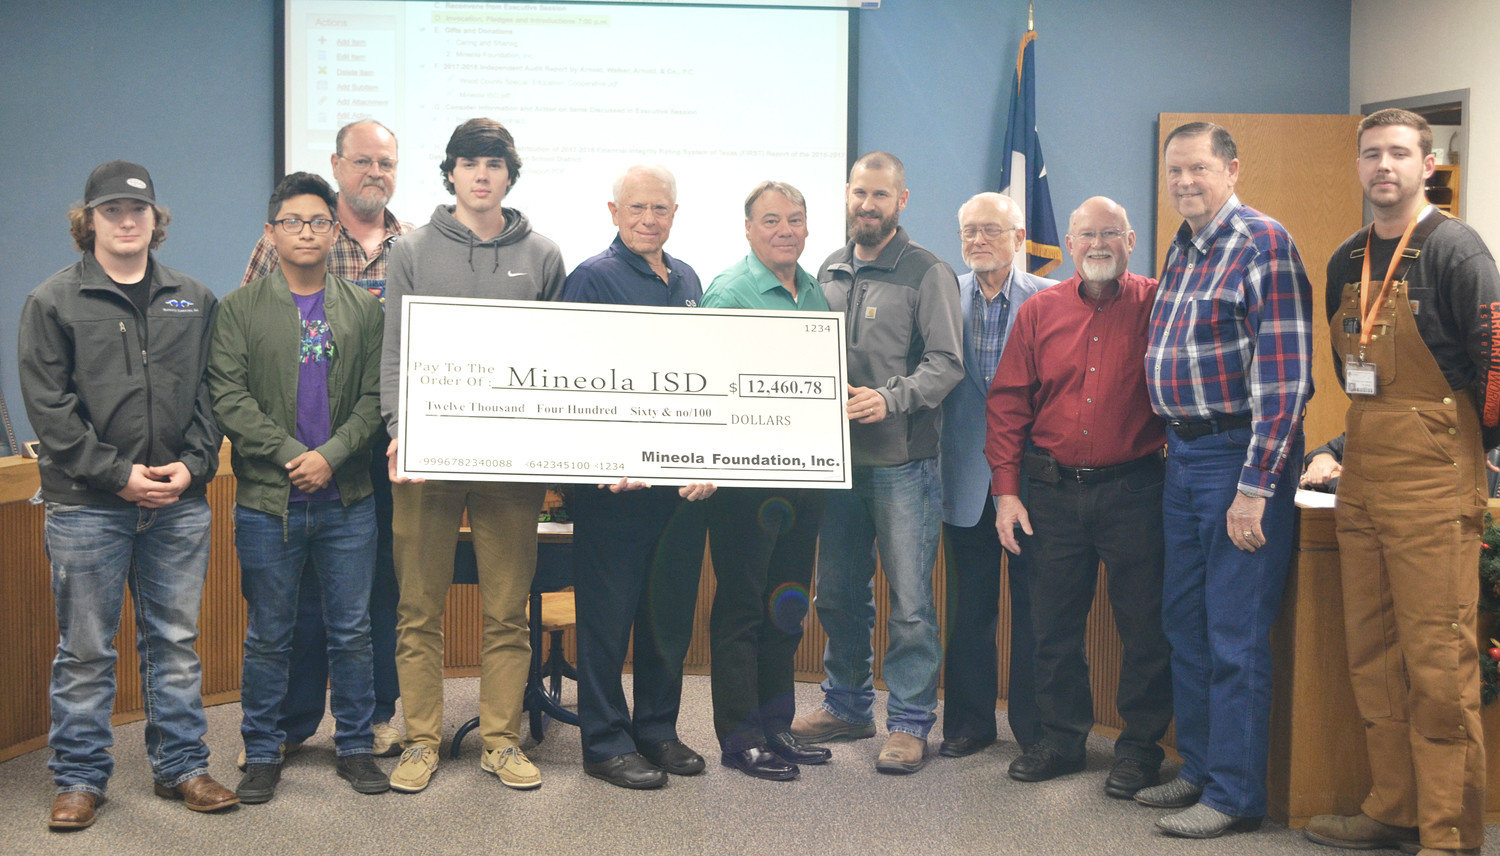 The Mineola Foundation on Nov. 26 made a $12,460.78 donation to the welding shop at Mineola High School. Welding is one of many job-oriented programs run through Career and Technical Education (CTE) in Mineola. The Foundation has been a major benefactor of CTE in Mineola and previously contributed to the school’s Auto Tech program. From left is Preston Mosher (student), Johnny Ramirez (student), Jackie Hays (teacher), Tristan Rychlik (student), Warren Brown, Glen Thurman, Adam Steck, Jean Meek, Waymon Ragsdale, Vince Colvin, and Brandon Williamsom (teacher). (Monitor photo by Hank Murphy).